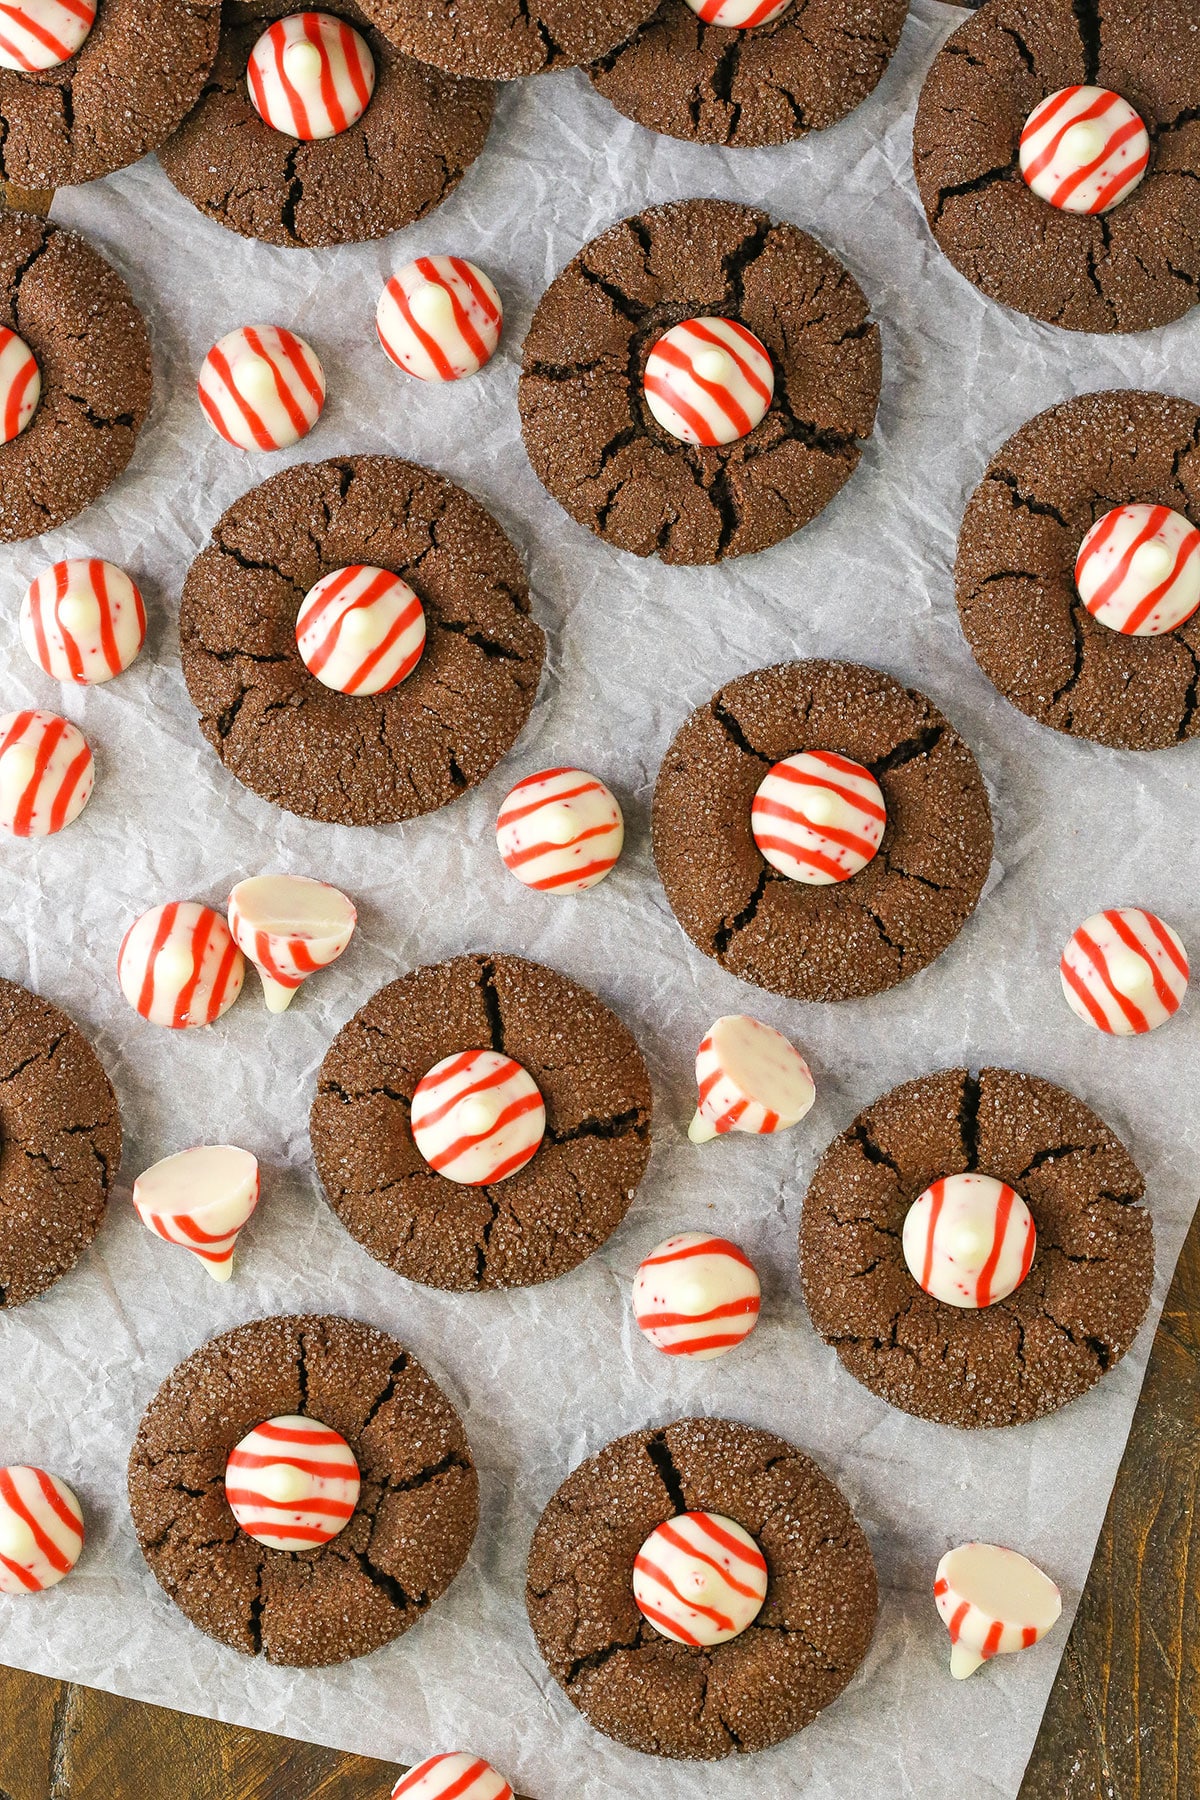 Overhead view of Peppermint Chocolate Thumbprint Cookies spread evenly over parchment paper on a wooden table